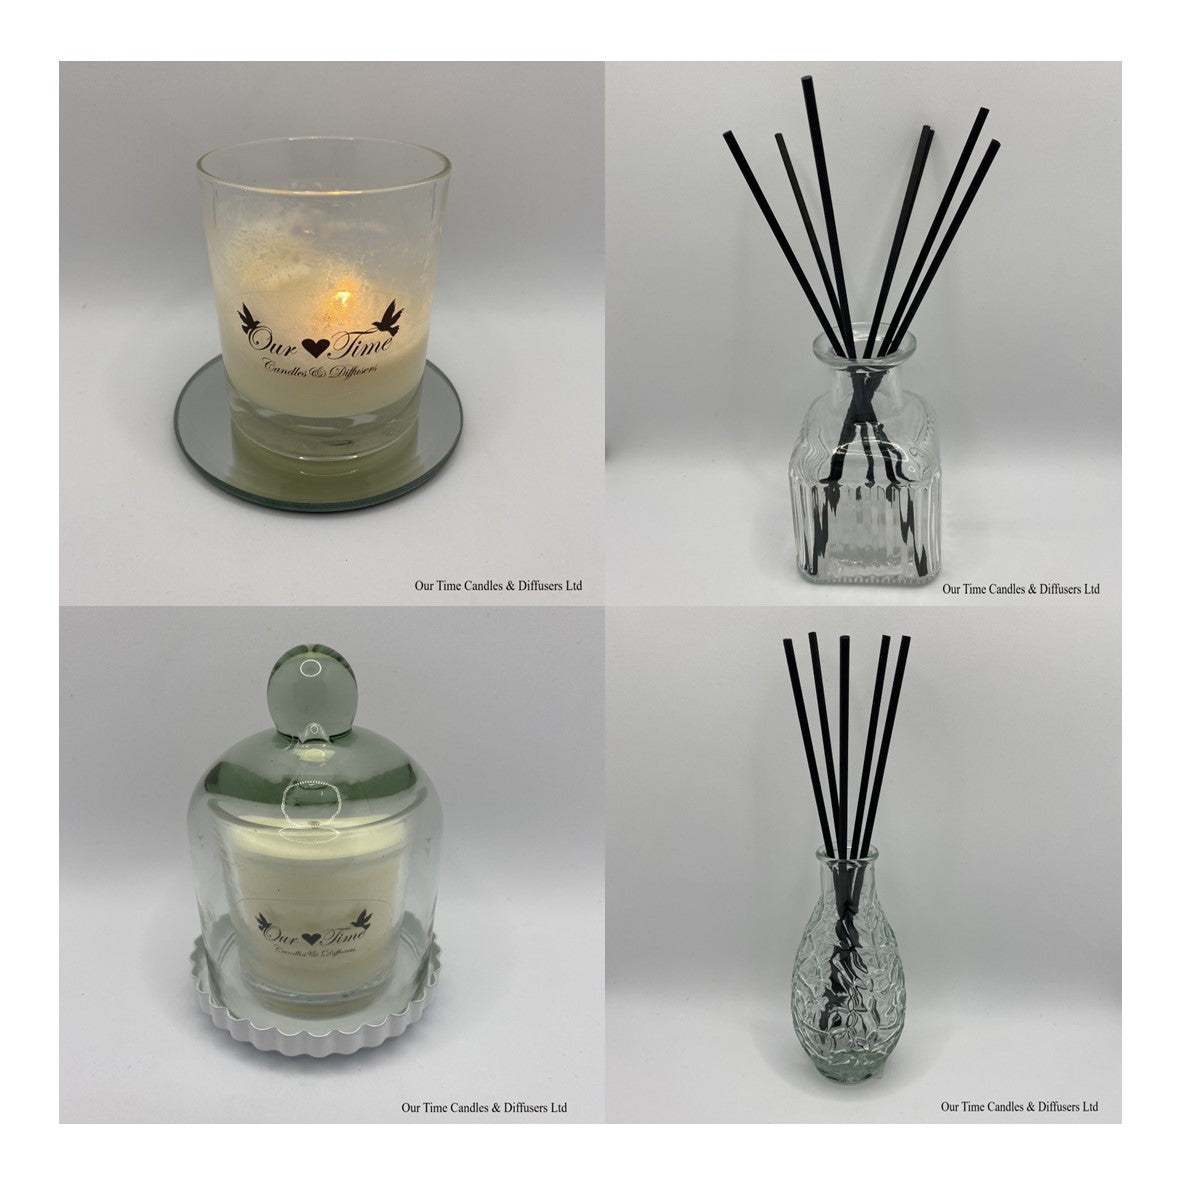 Accessories from Our Time Candles and Diffusers - vases and candle plates